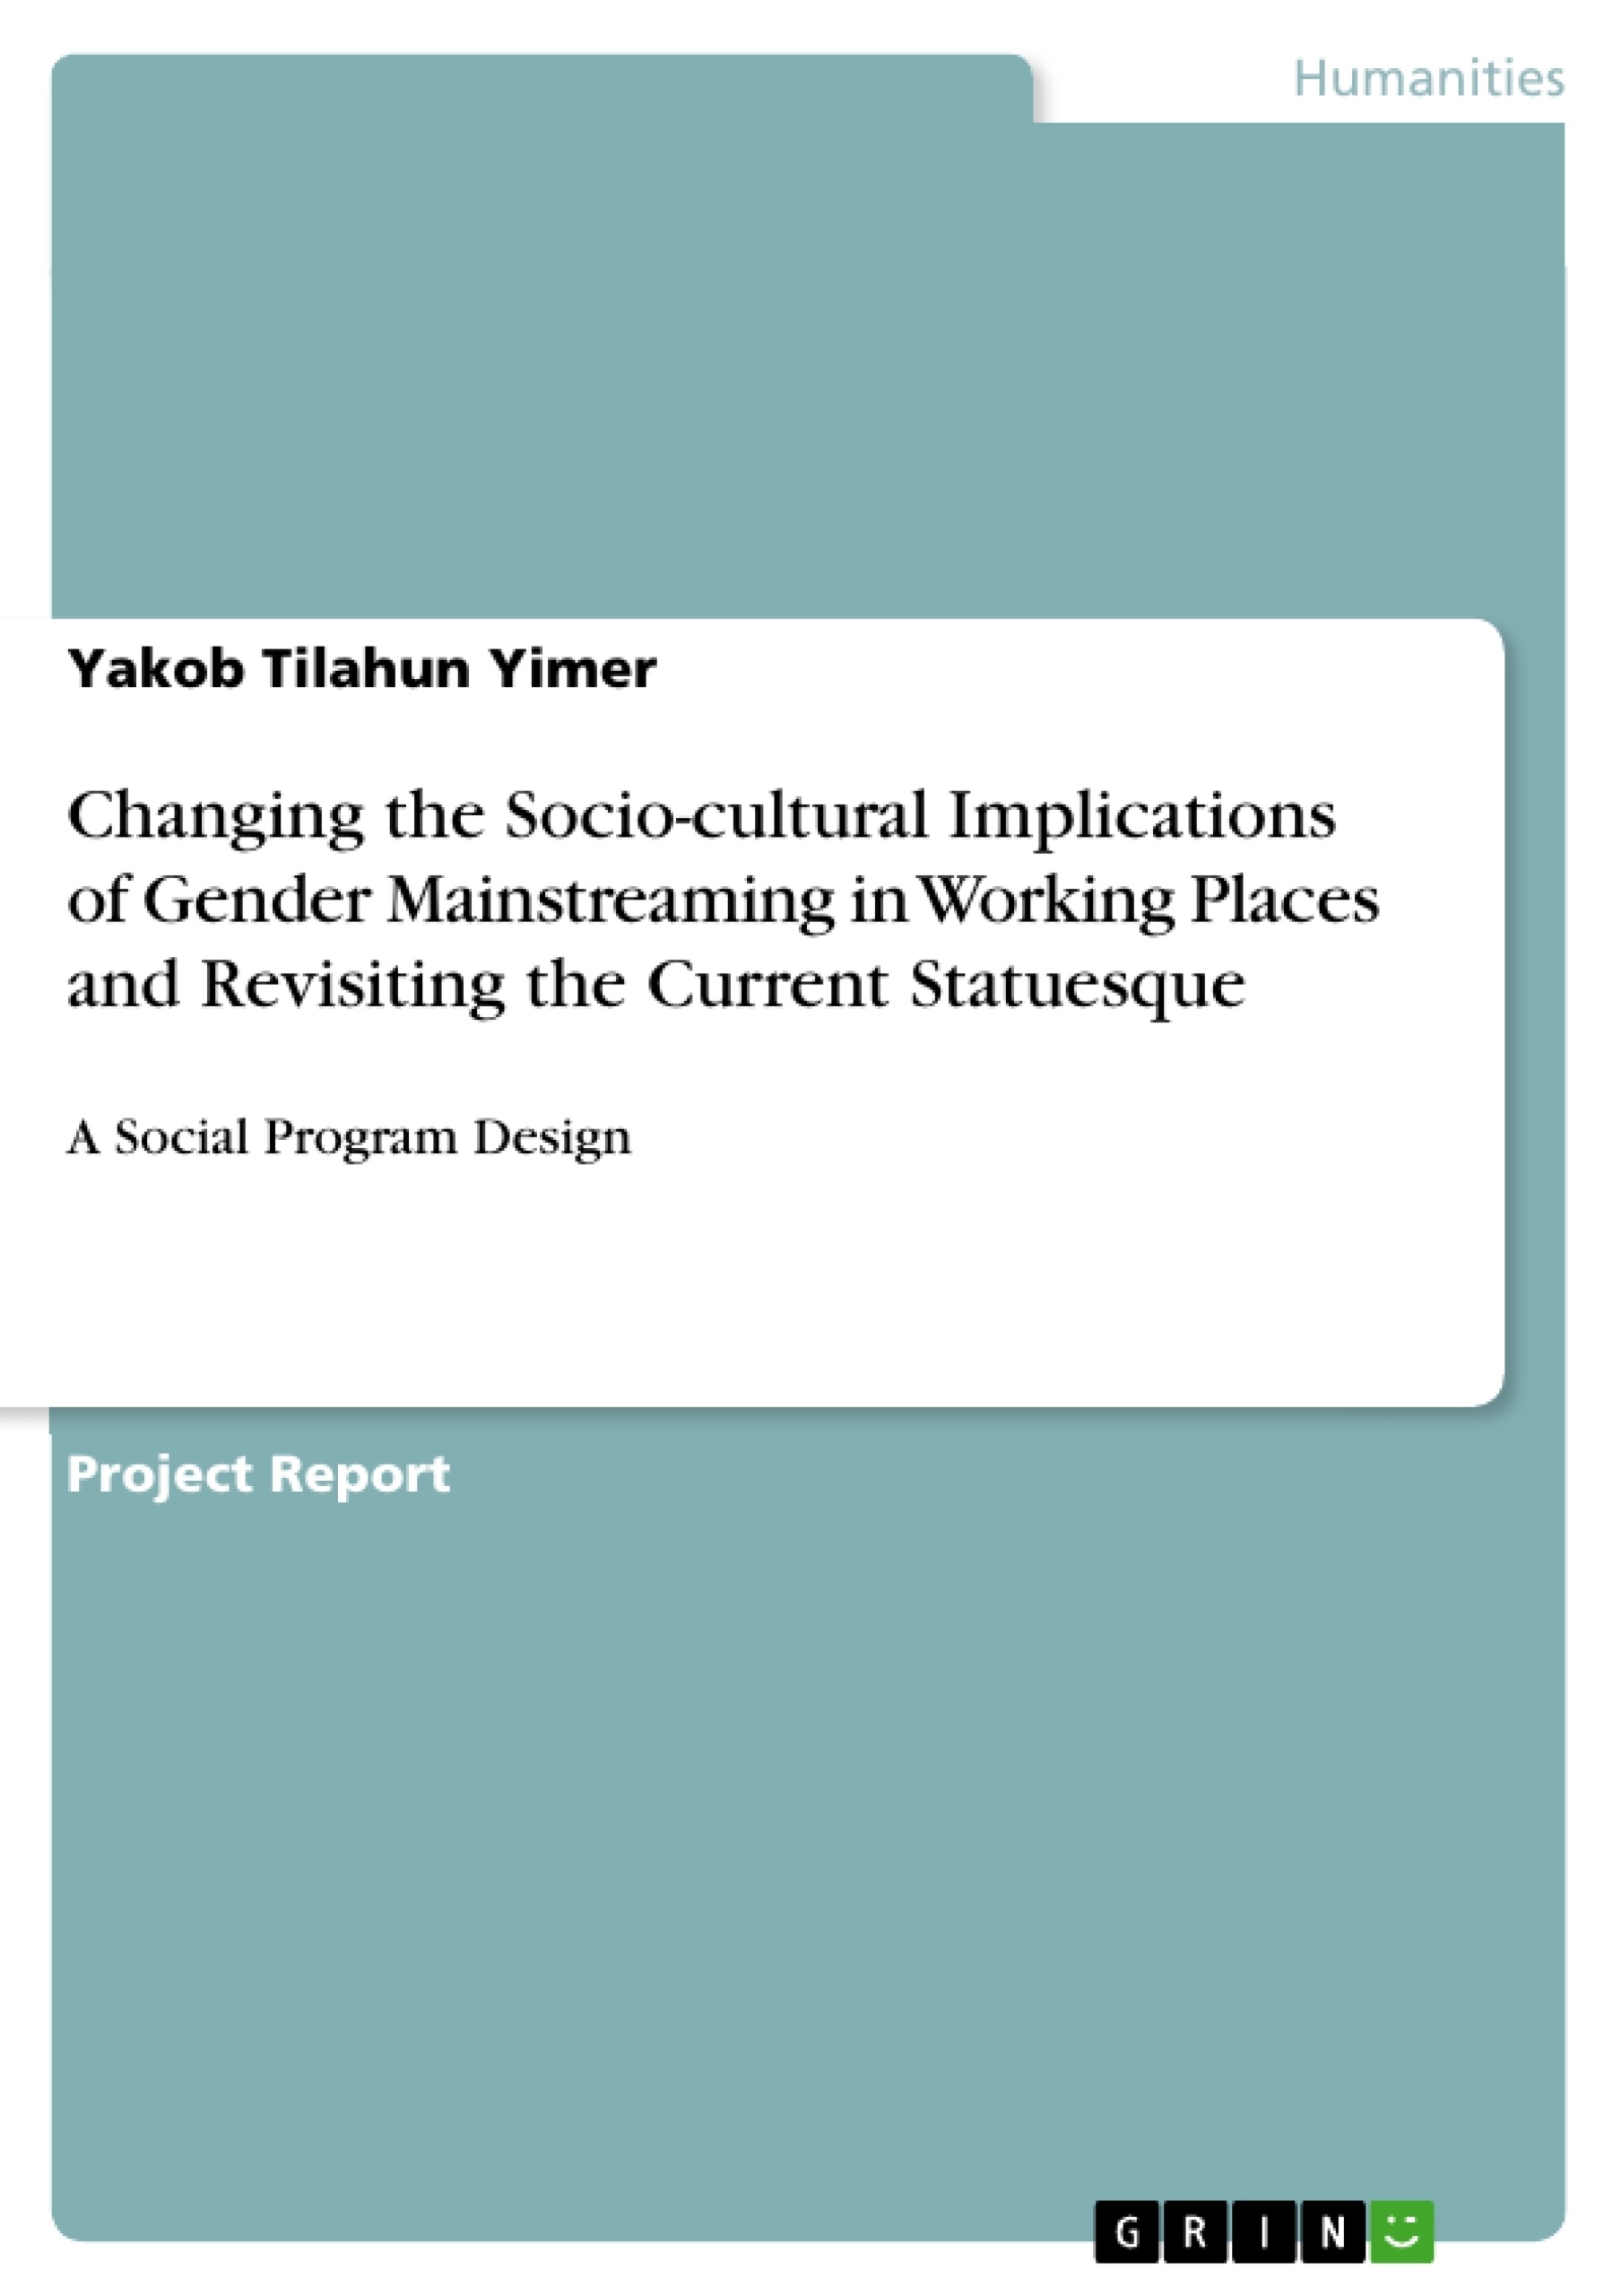 Título: Changing the Socio-cultural Implications of Gender Mainstreaming in Working Places and Revisiting the Current Statuesque